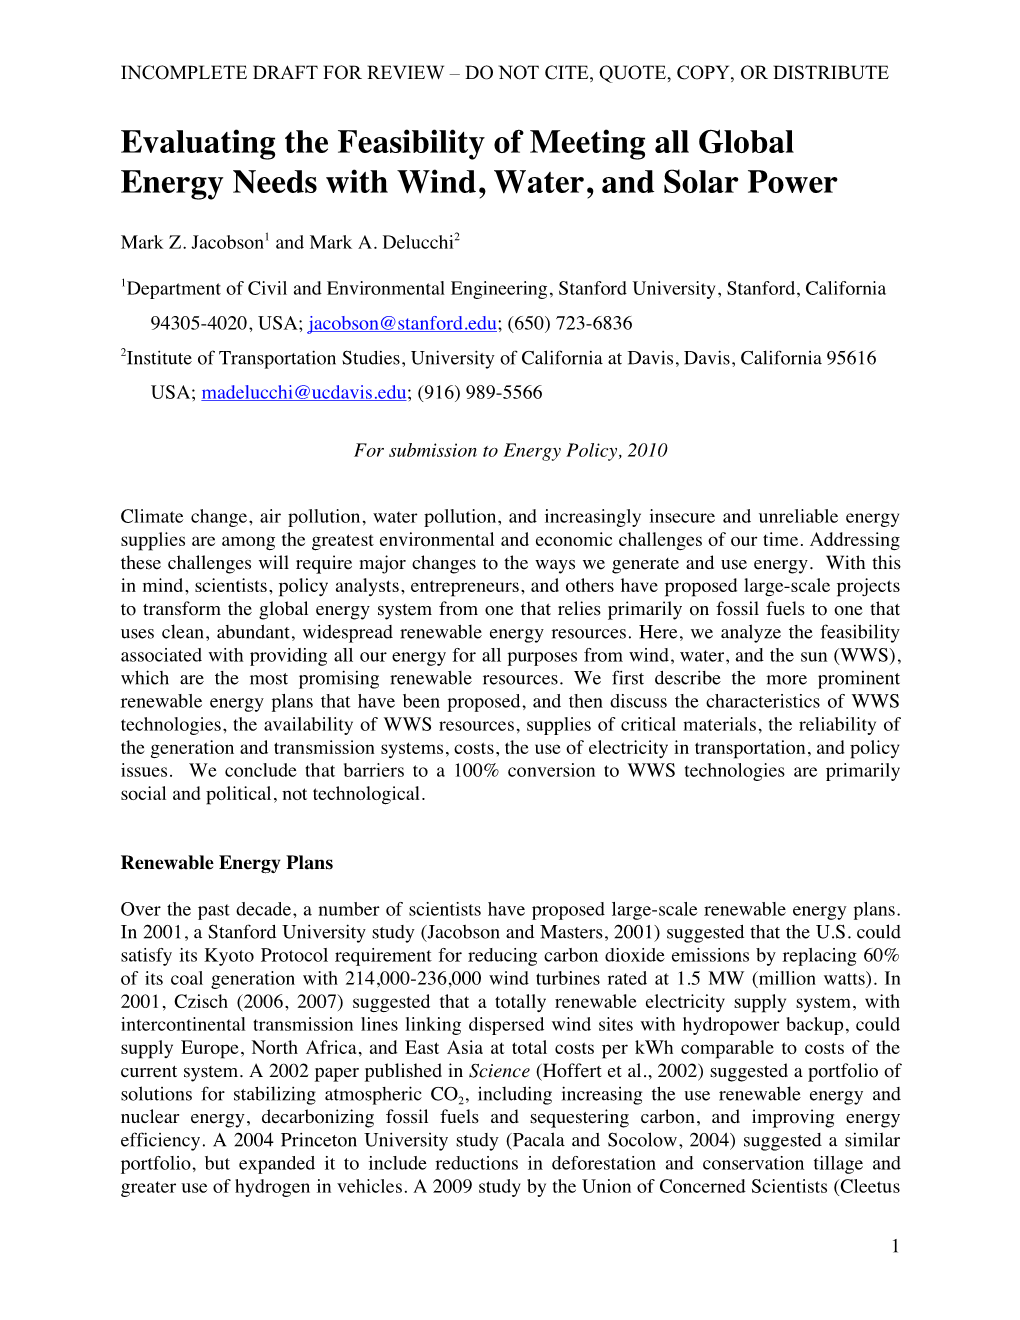 Evaluating the Feasibility of Meeting All Global Energy Needs with Wind, Water, and Solar Power